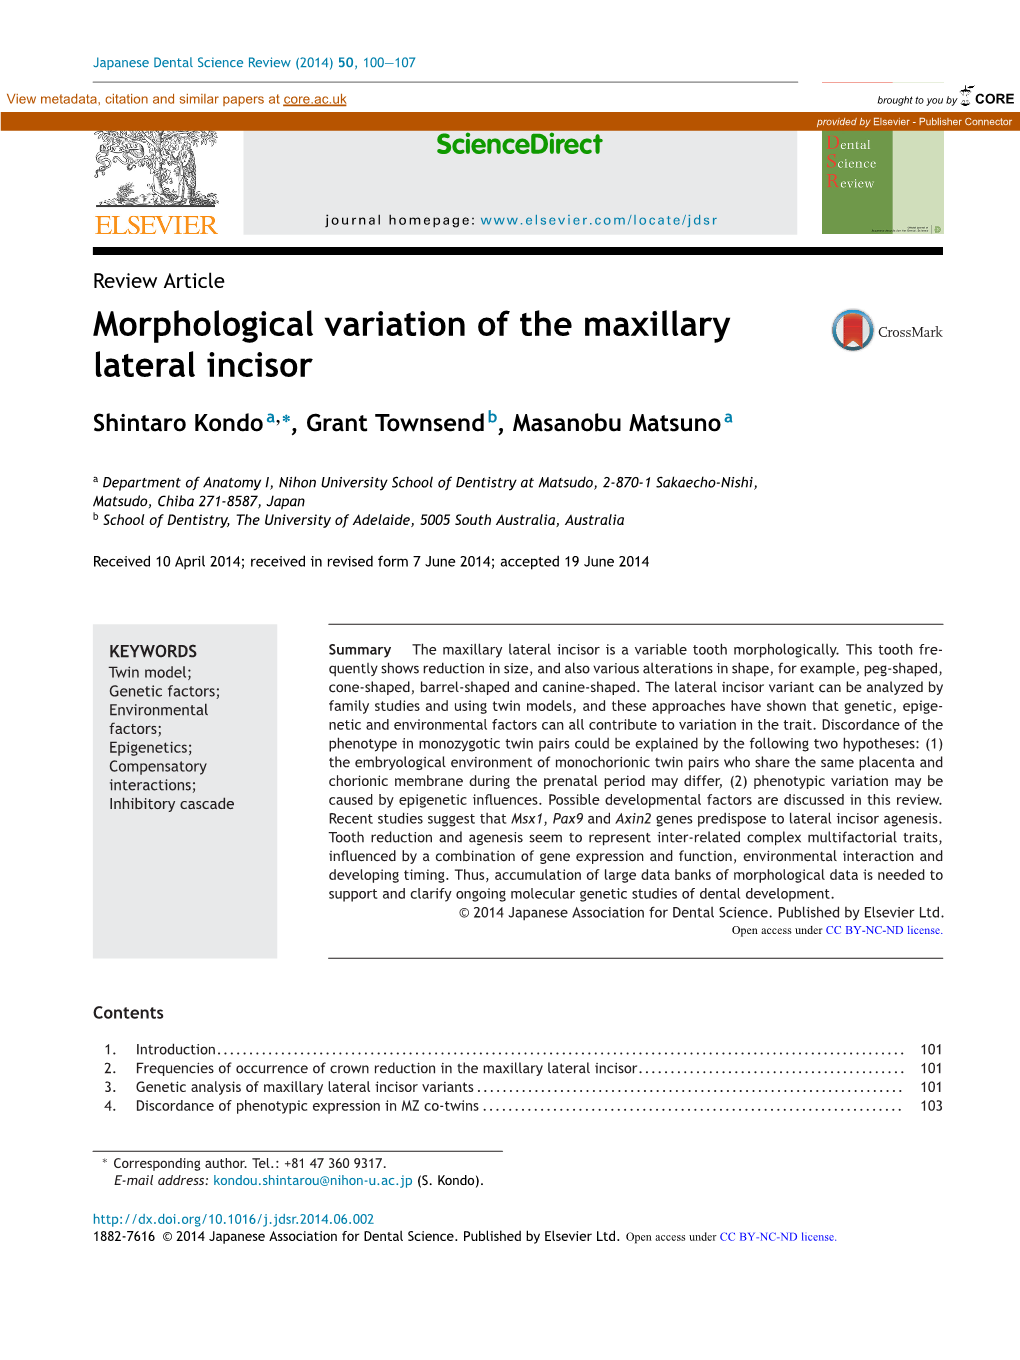 Morphological Variation of the Maxillary Lateral Incisor